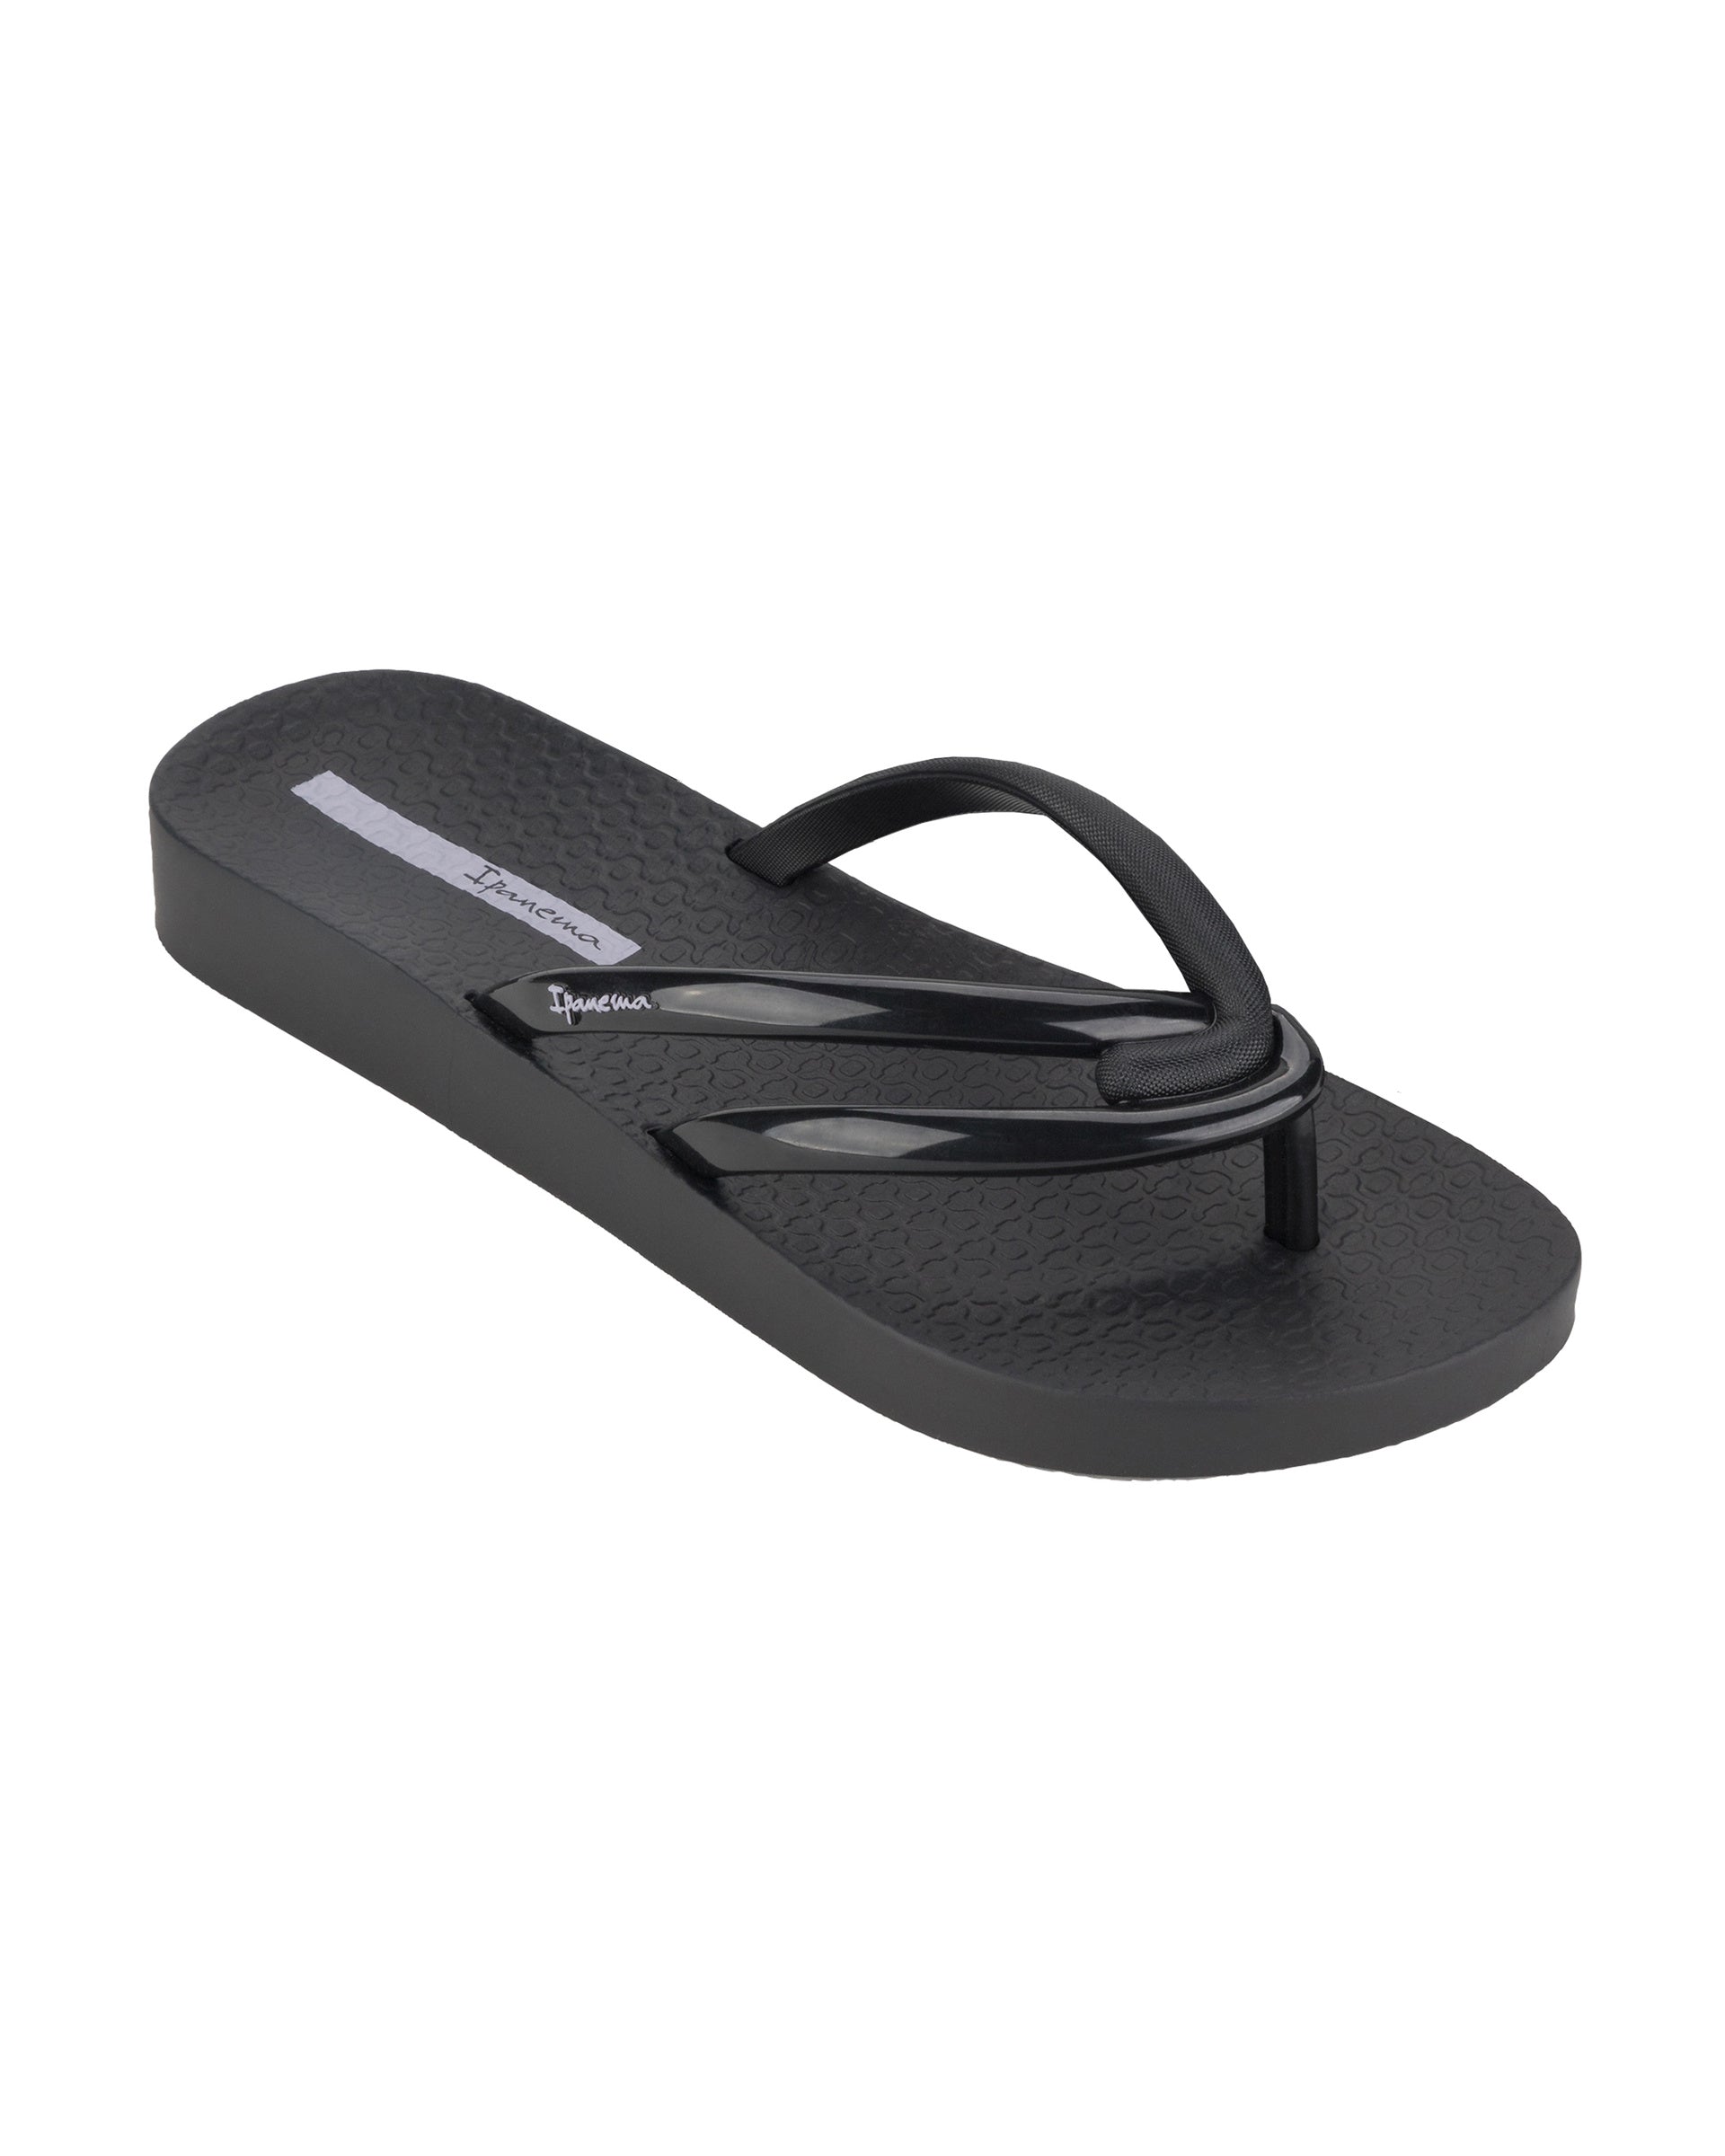 Angled view of a black Ipanema Comfy women's flip flop.